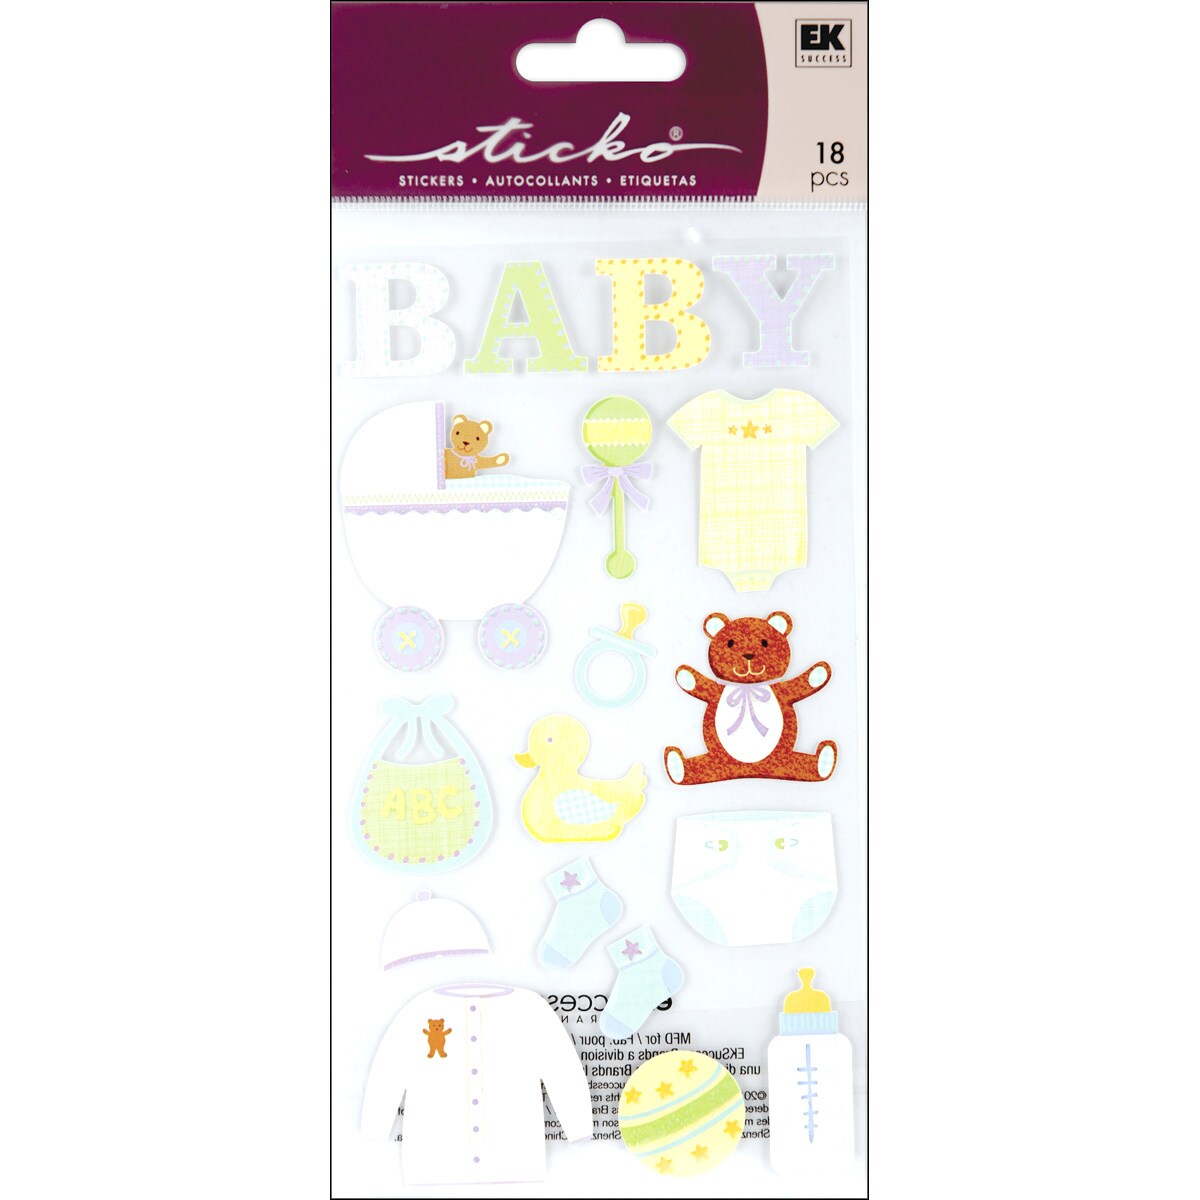 Objects and Accessories in For Baby for New